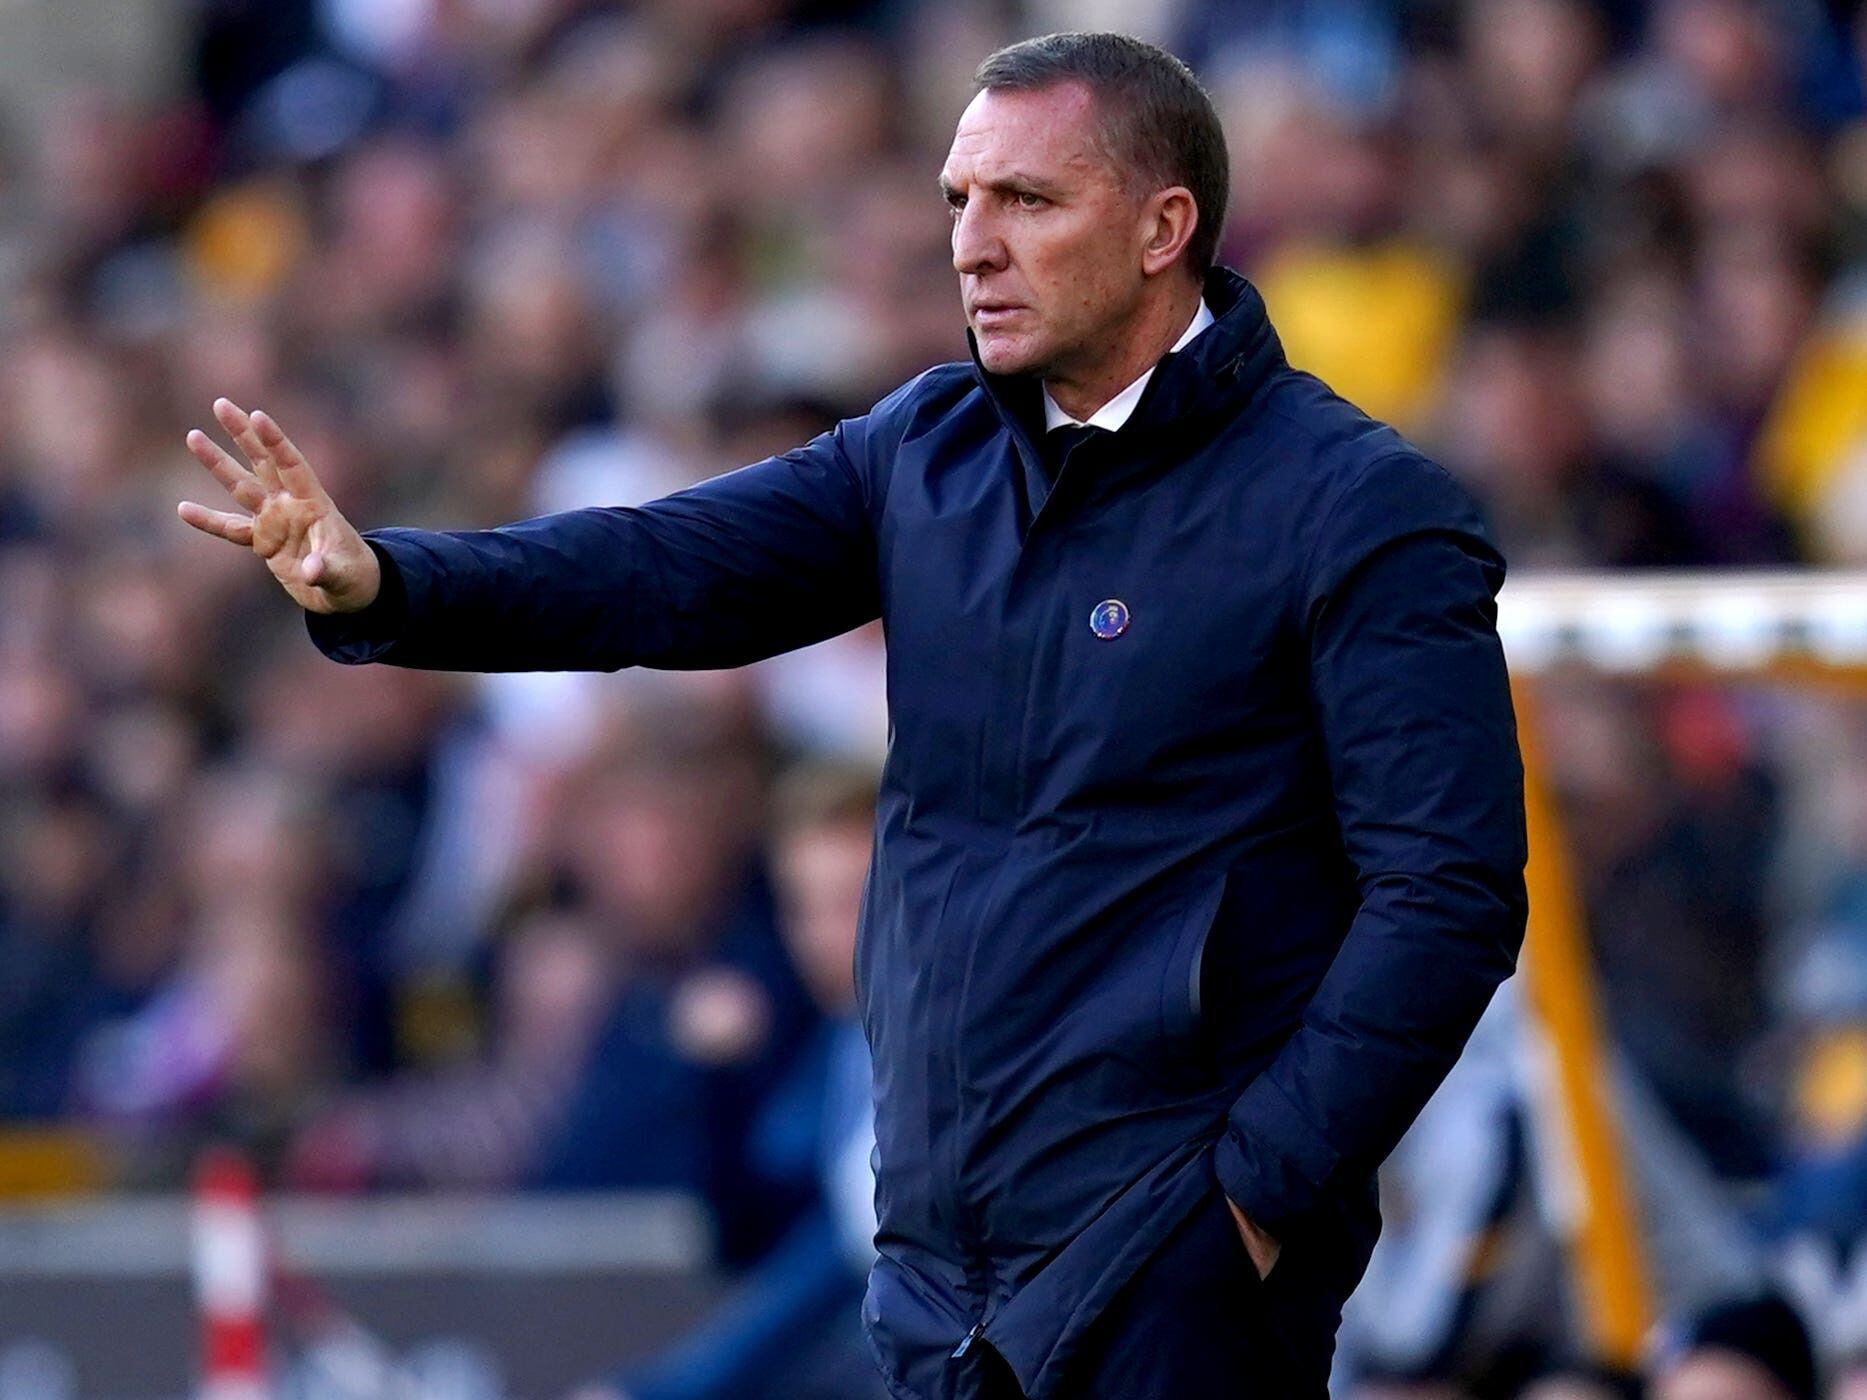 Leicester will not underestimate Newport after Stockport scare – Brendan Rodgers